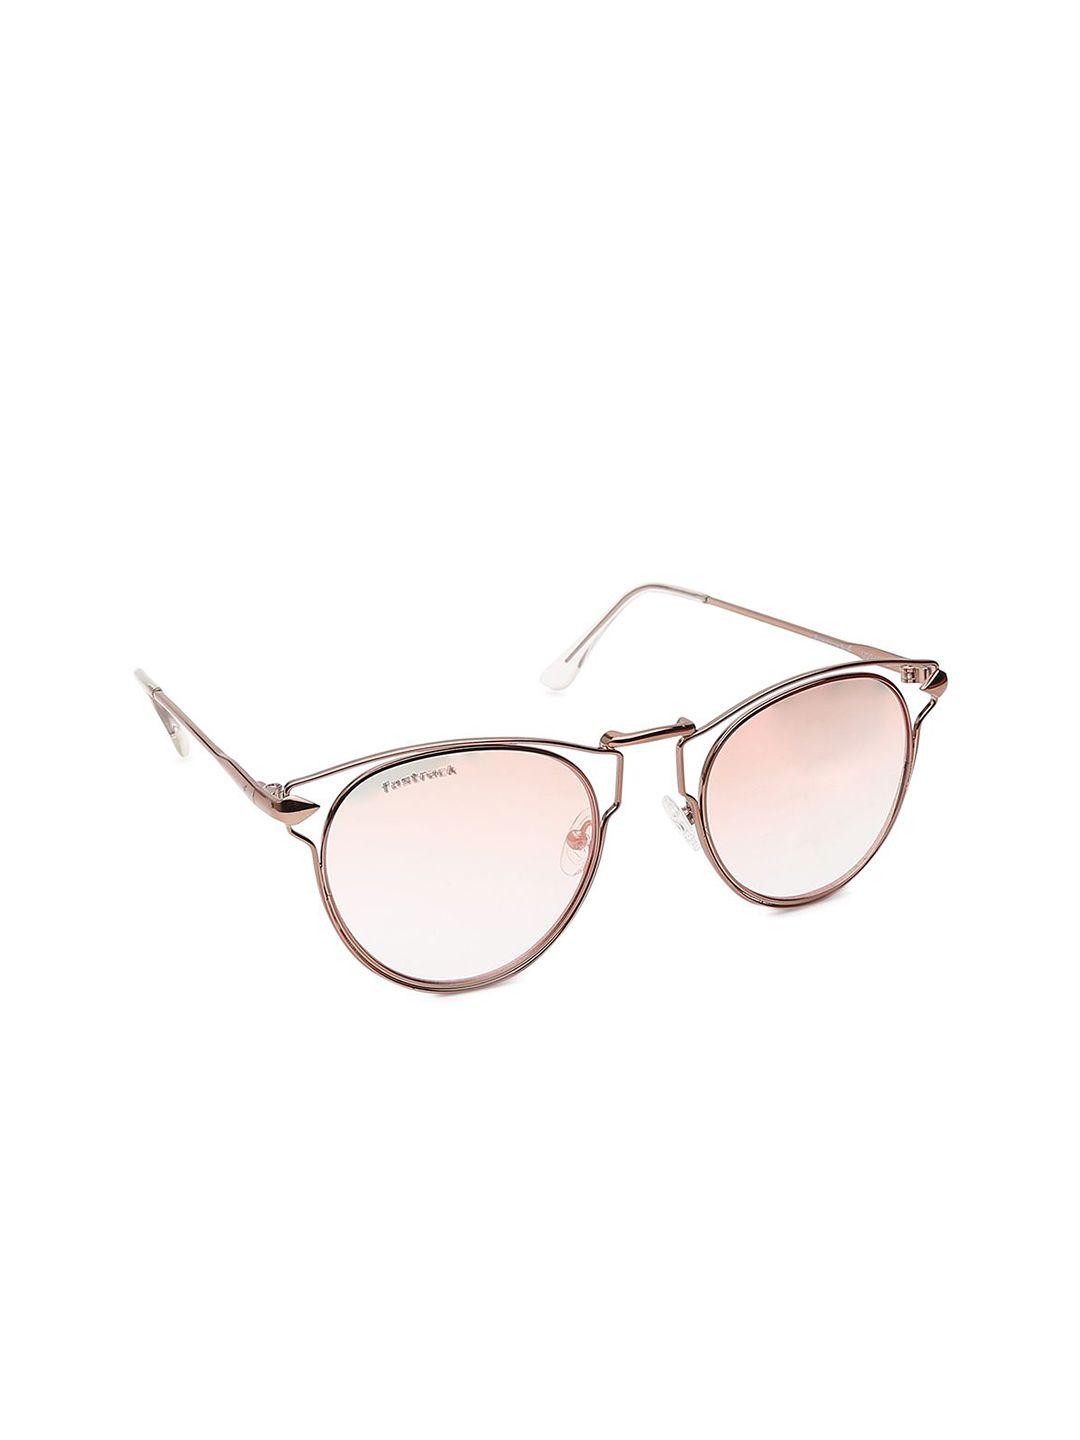 fastrack unisex brown lens & pink cateye sunglasses with uv protected lens